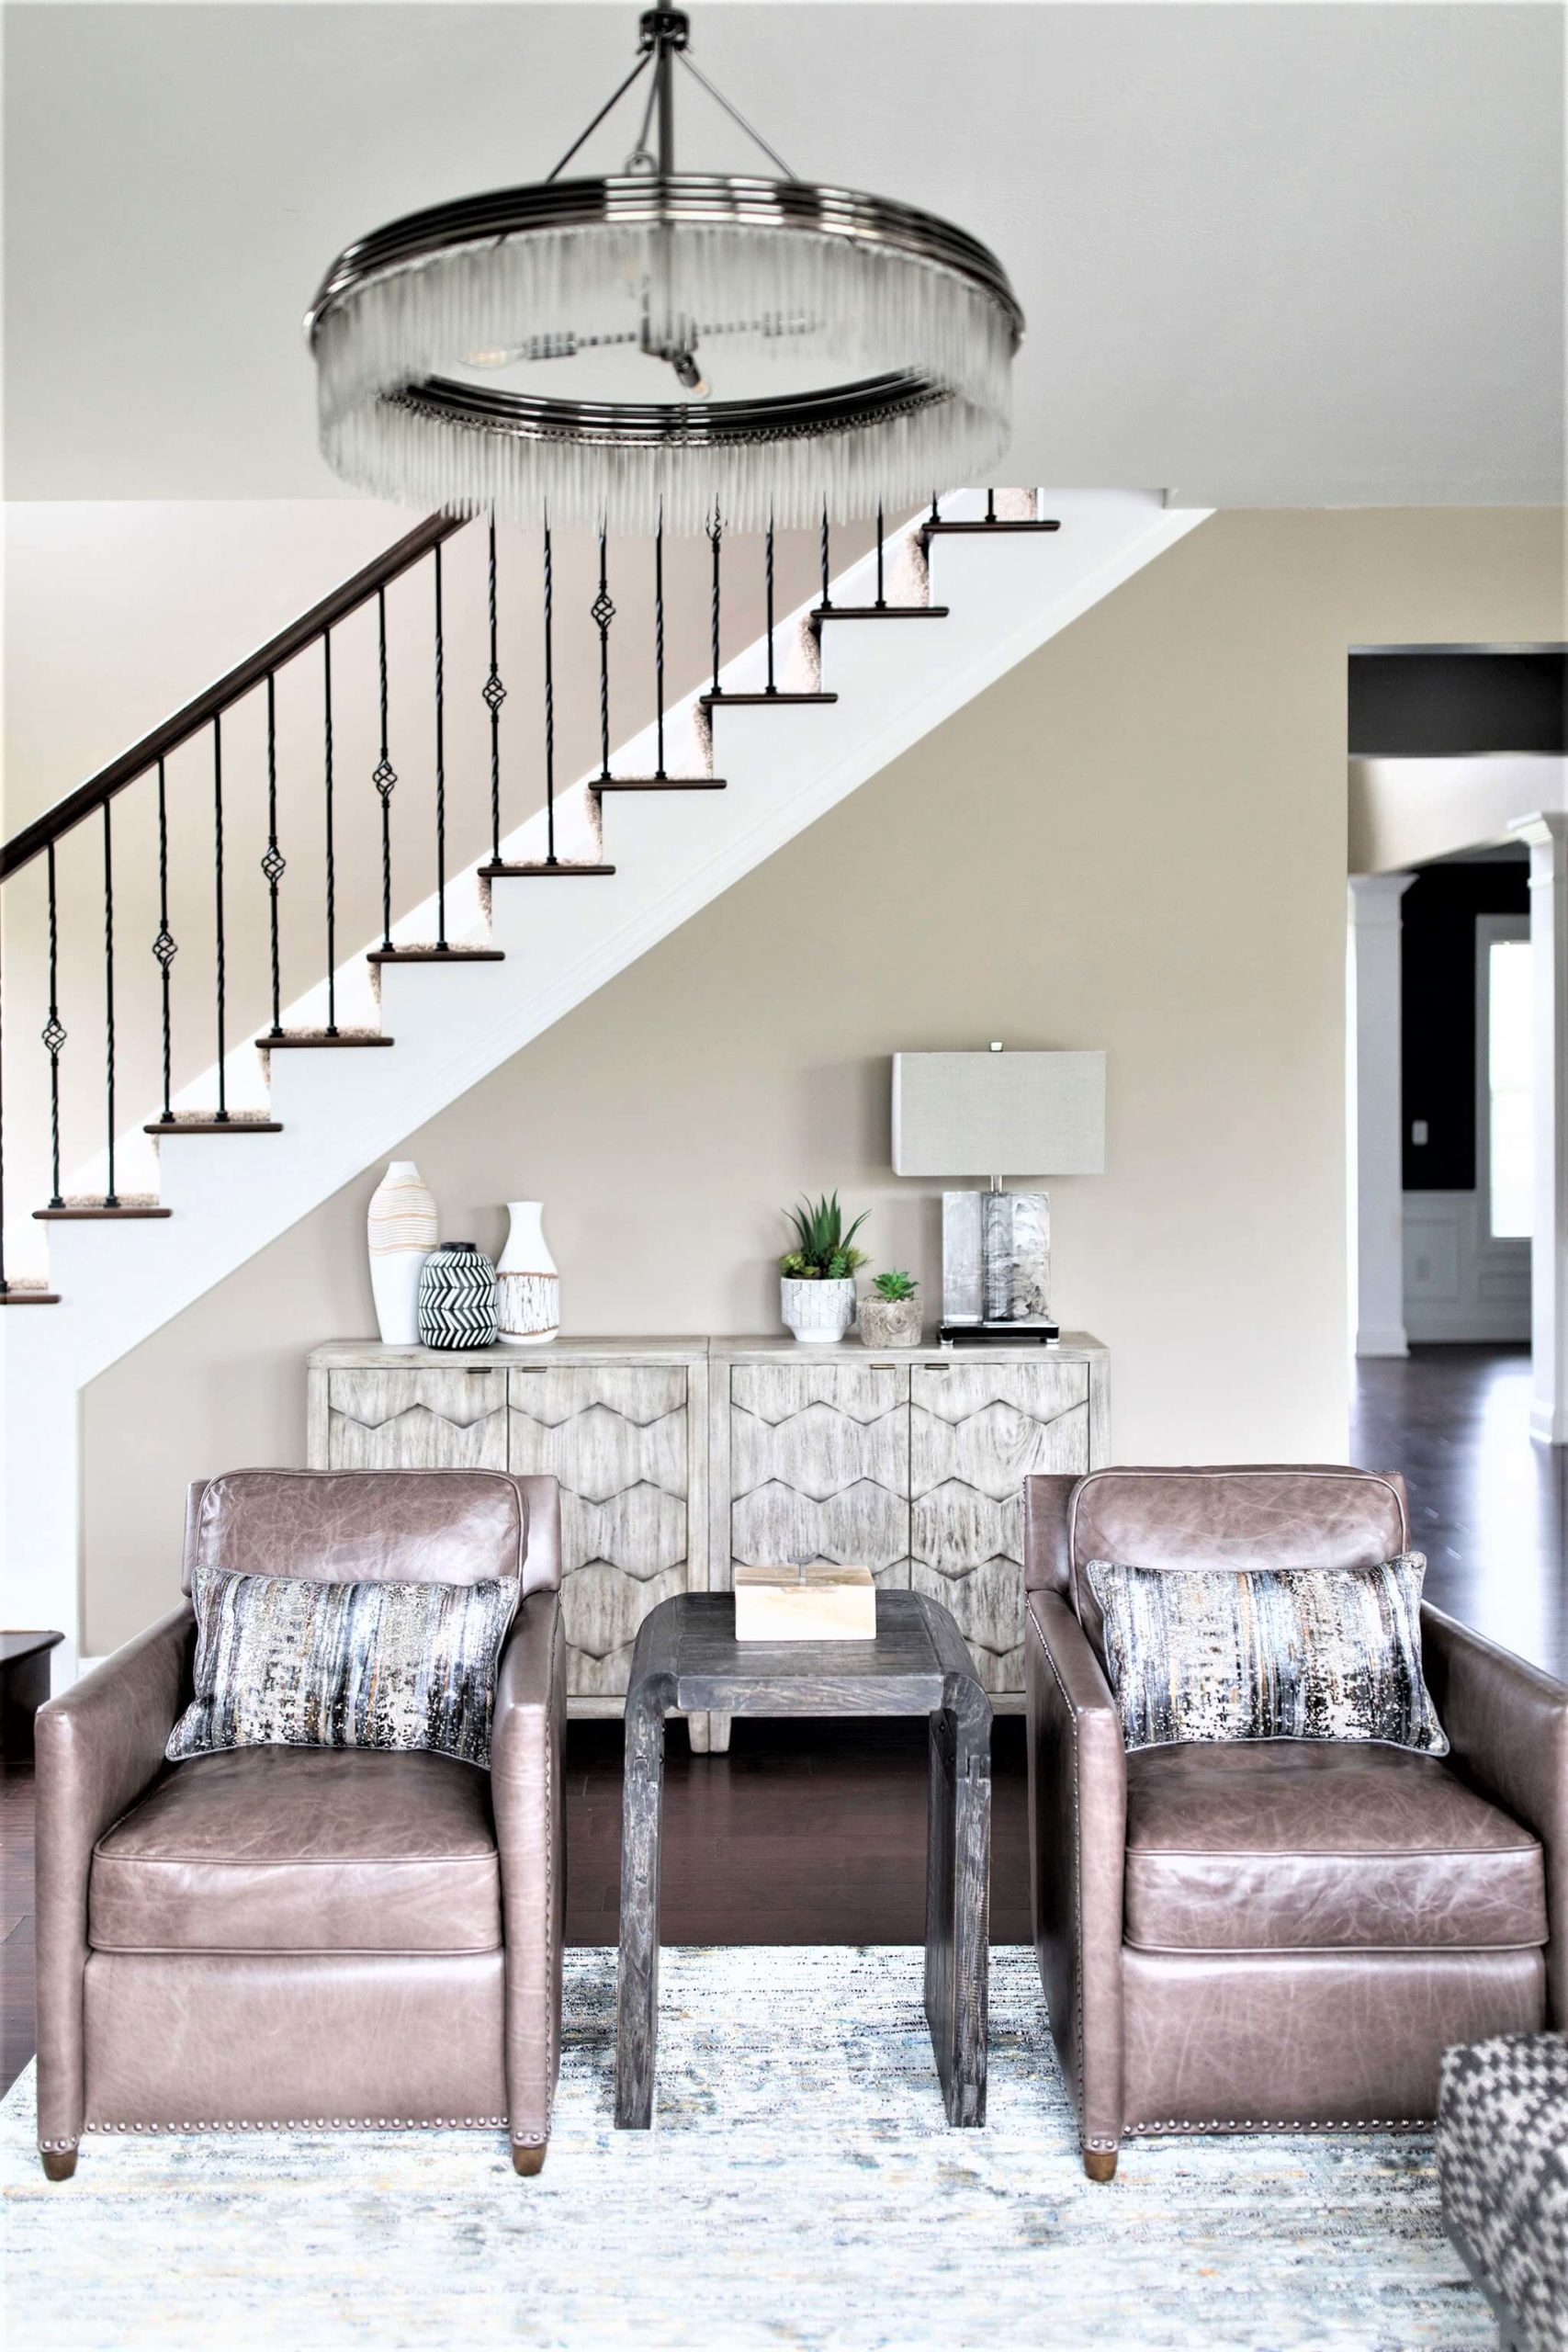 Moody Urban Home Stairway in Family Room Space Lindsey Putzier Design Studio